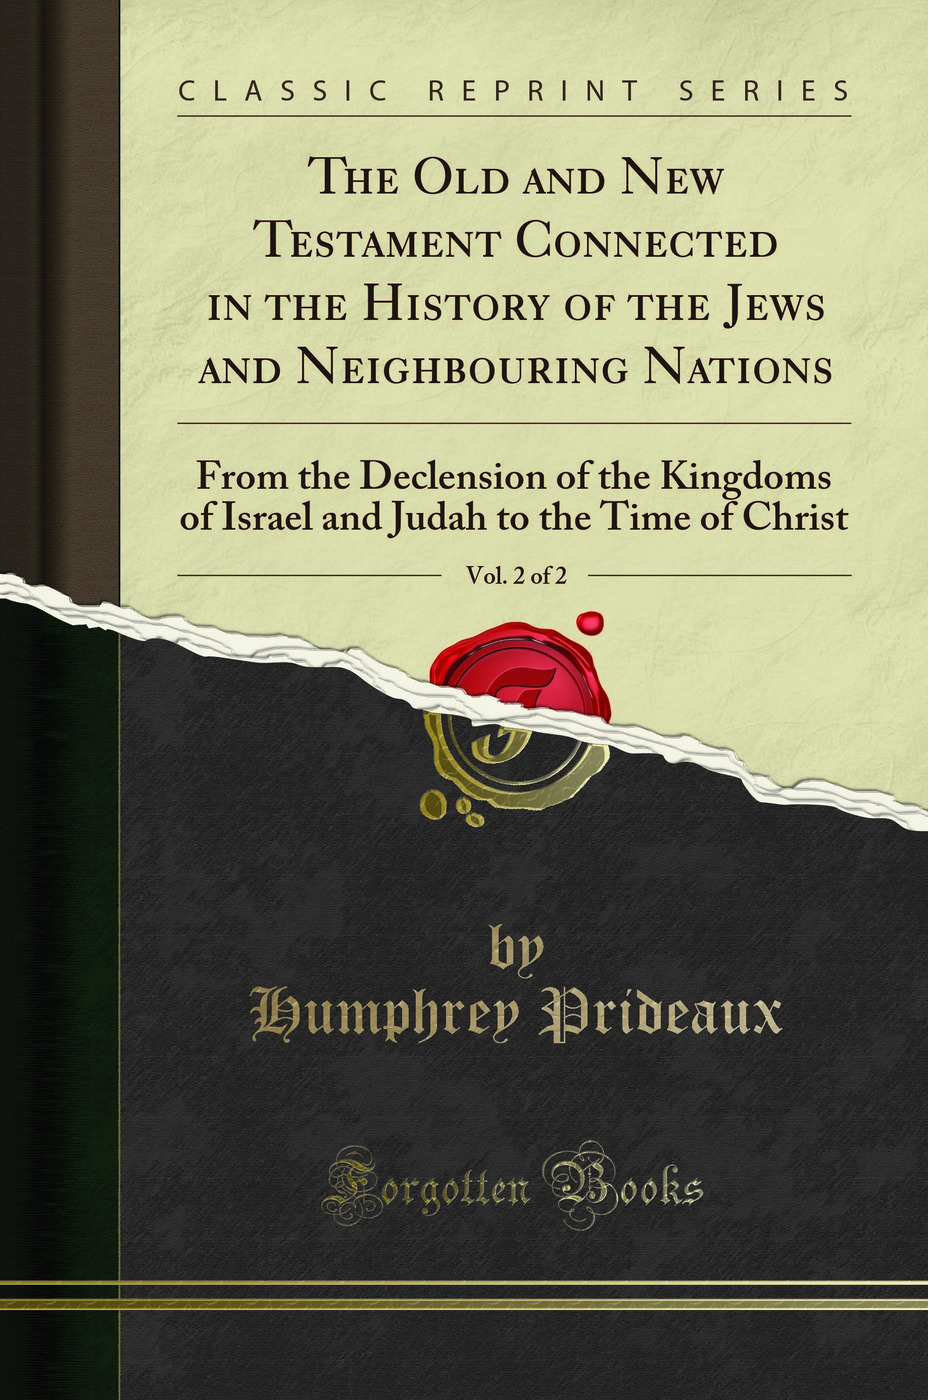 The Old and New Testament Connected in the History of the Jews and Neighbouring - Humphrey Prideaux